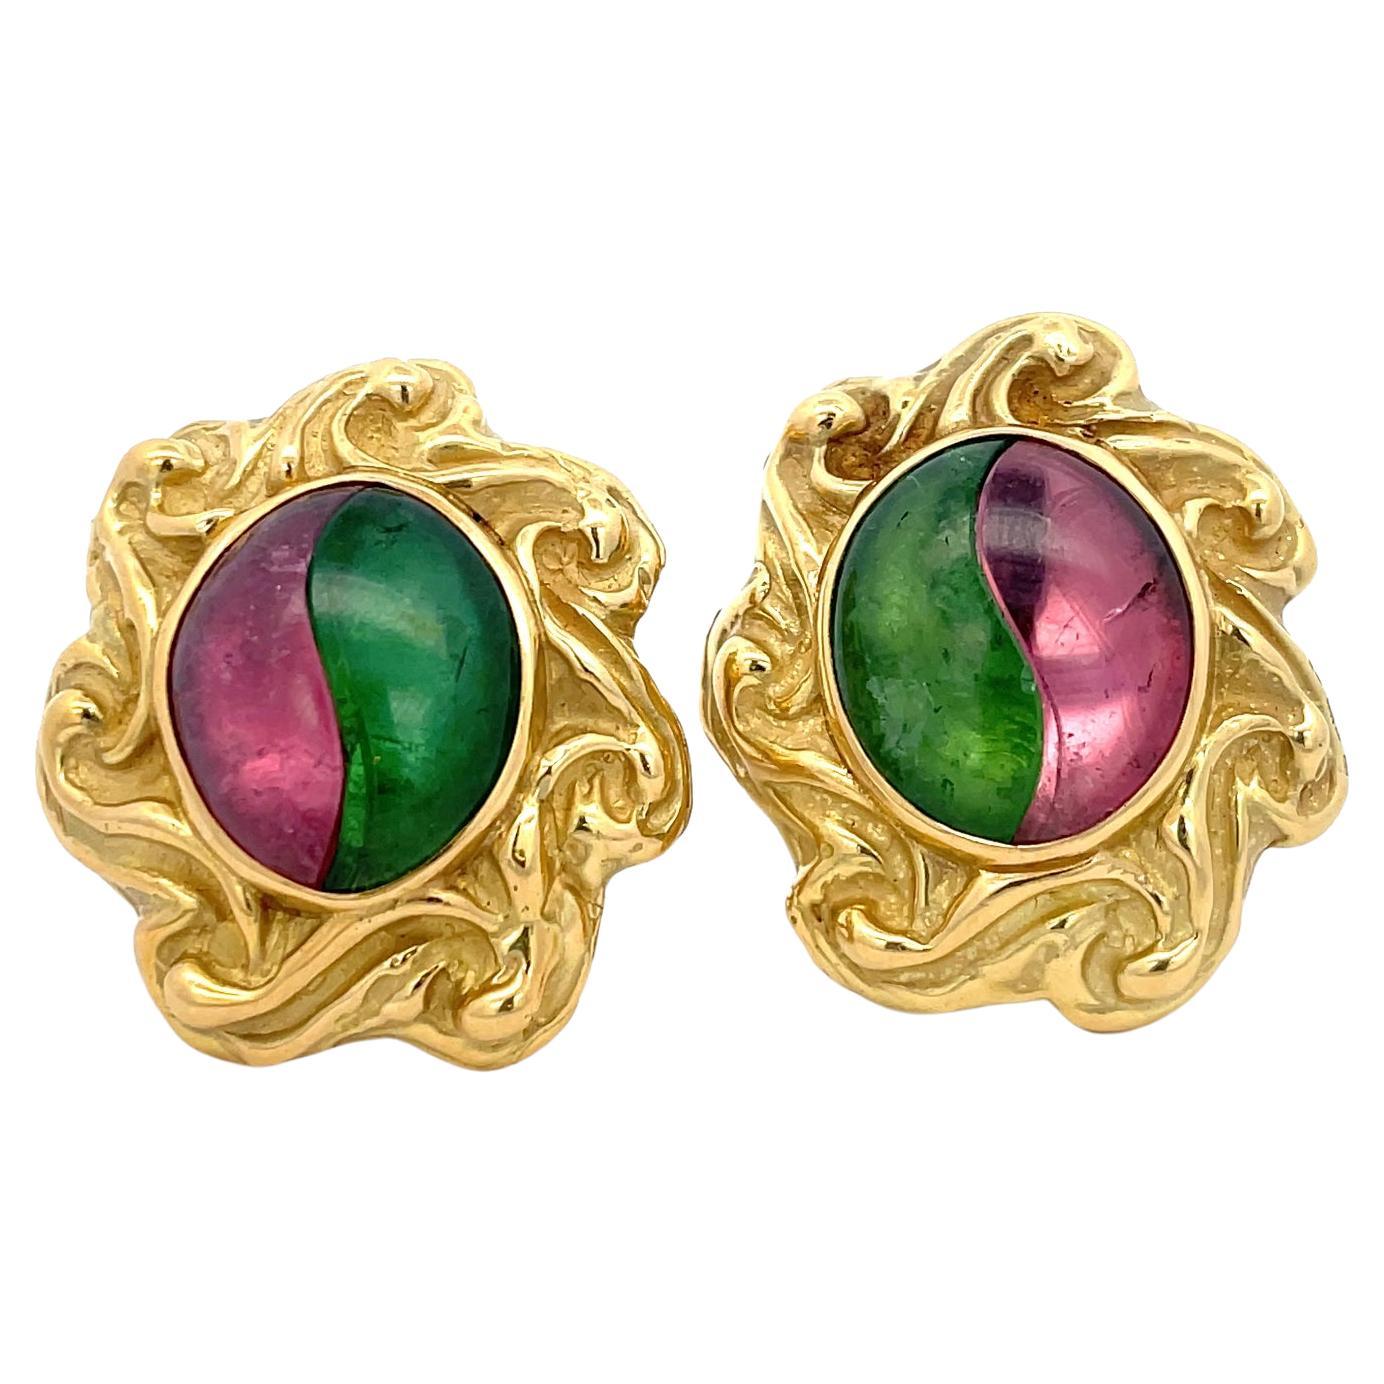 Elizabeth Gage Pink & Green Tourmaline Clip-On Earrings 18K Yellow Gold For Sale